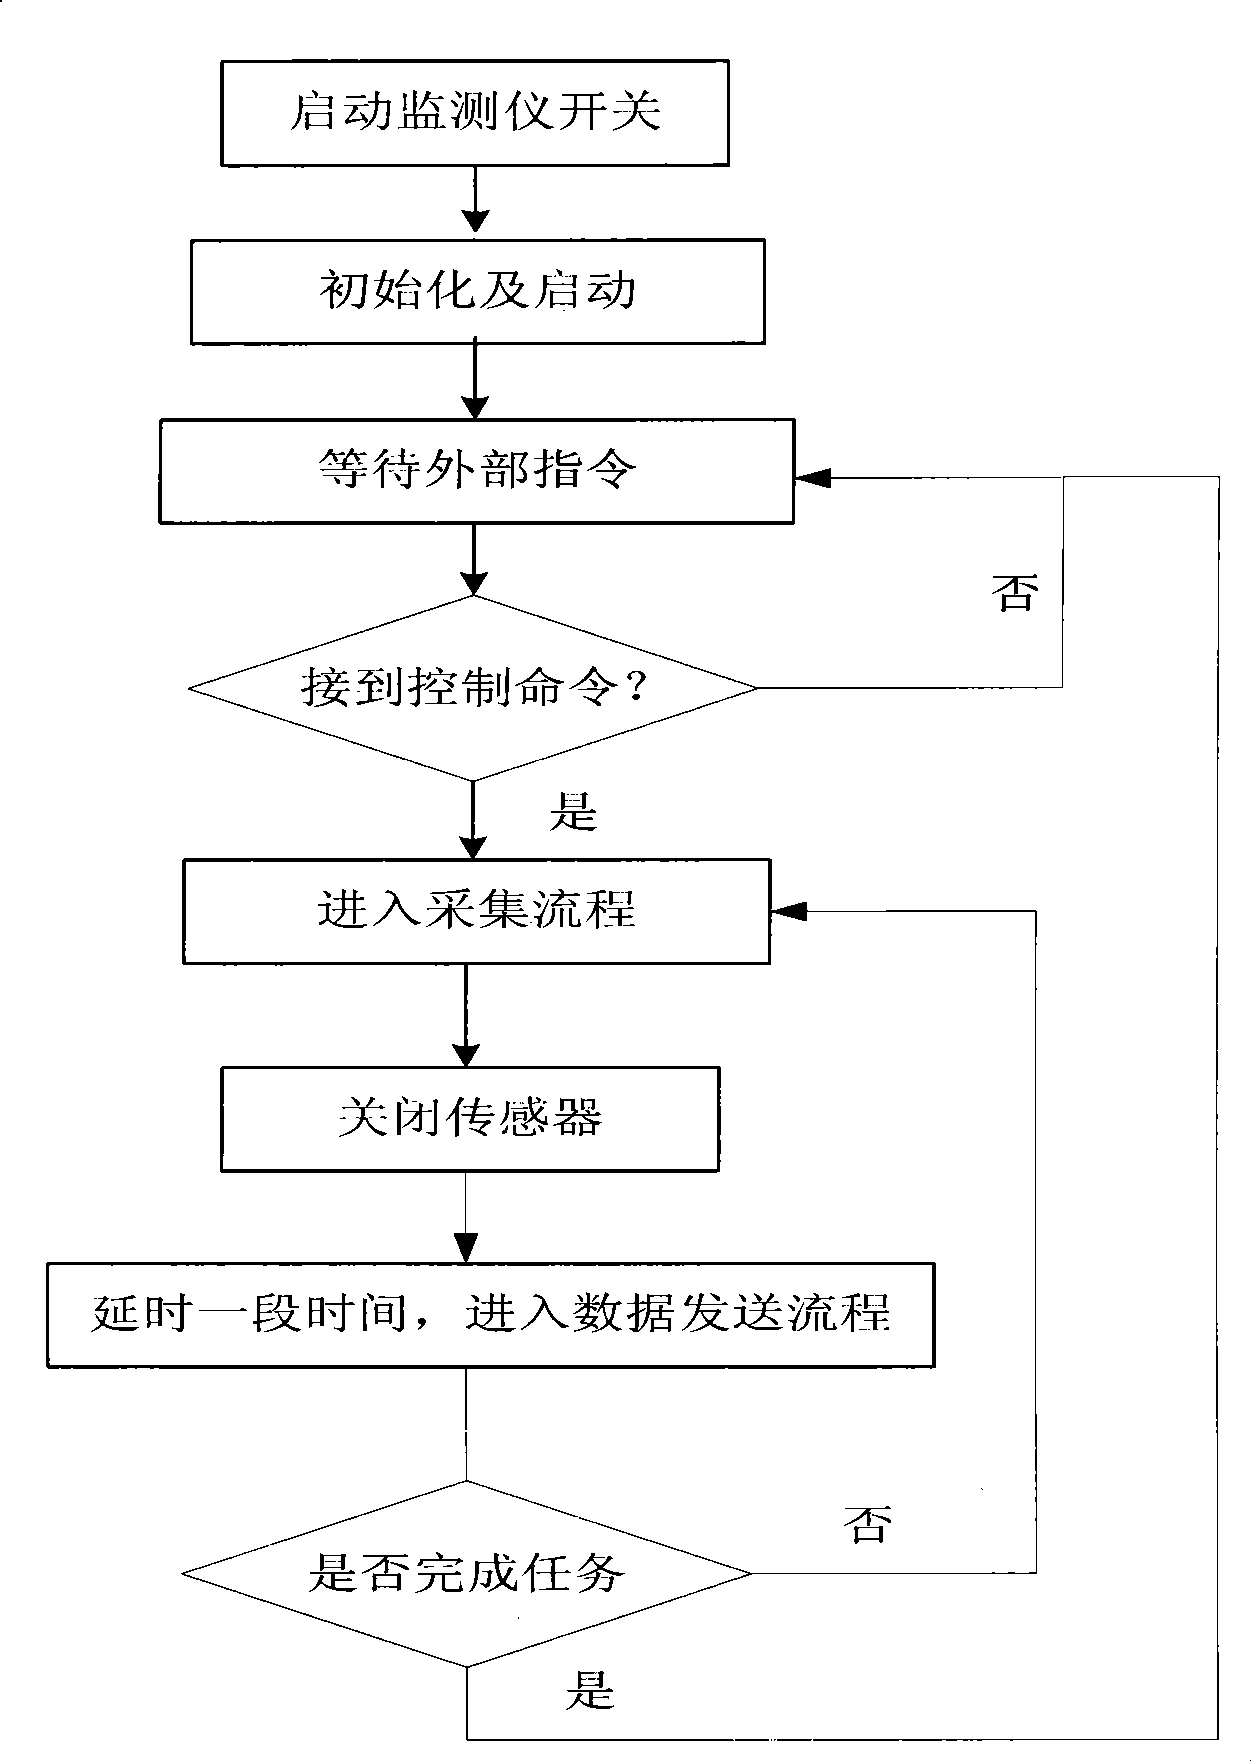 Method for testing vibration of high-tower structure of transmission line